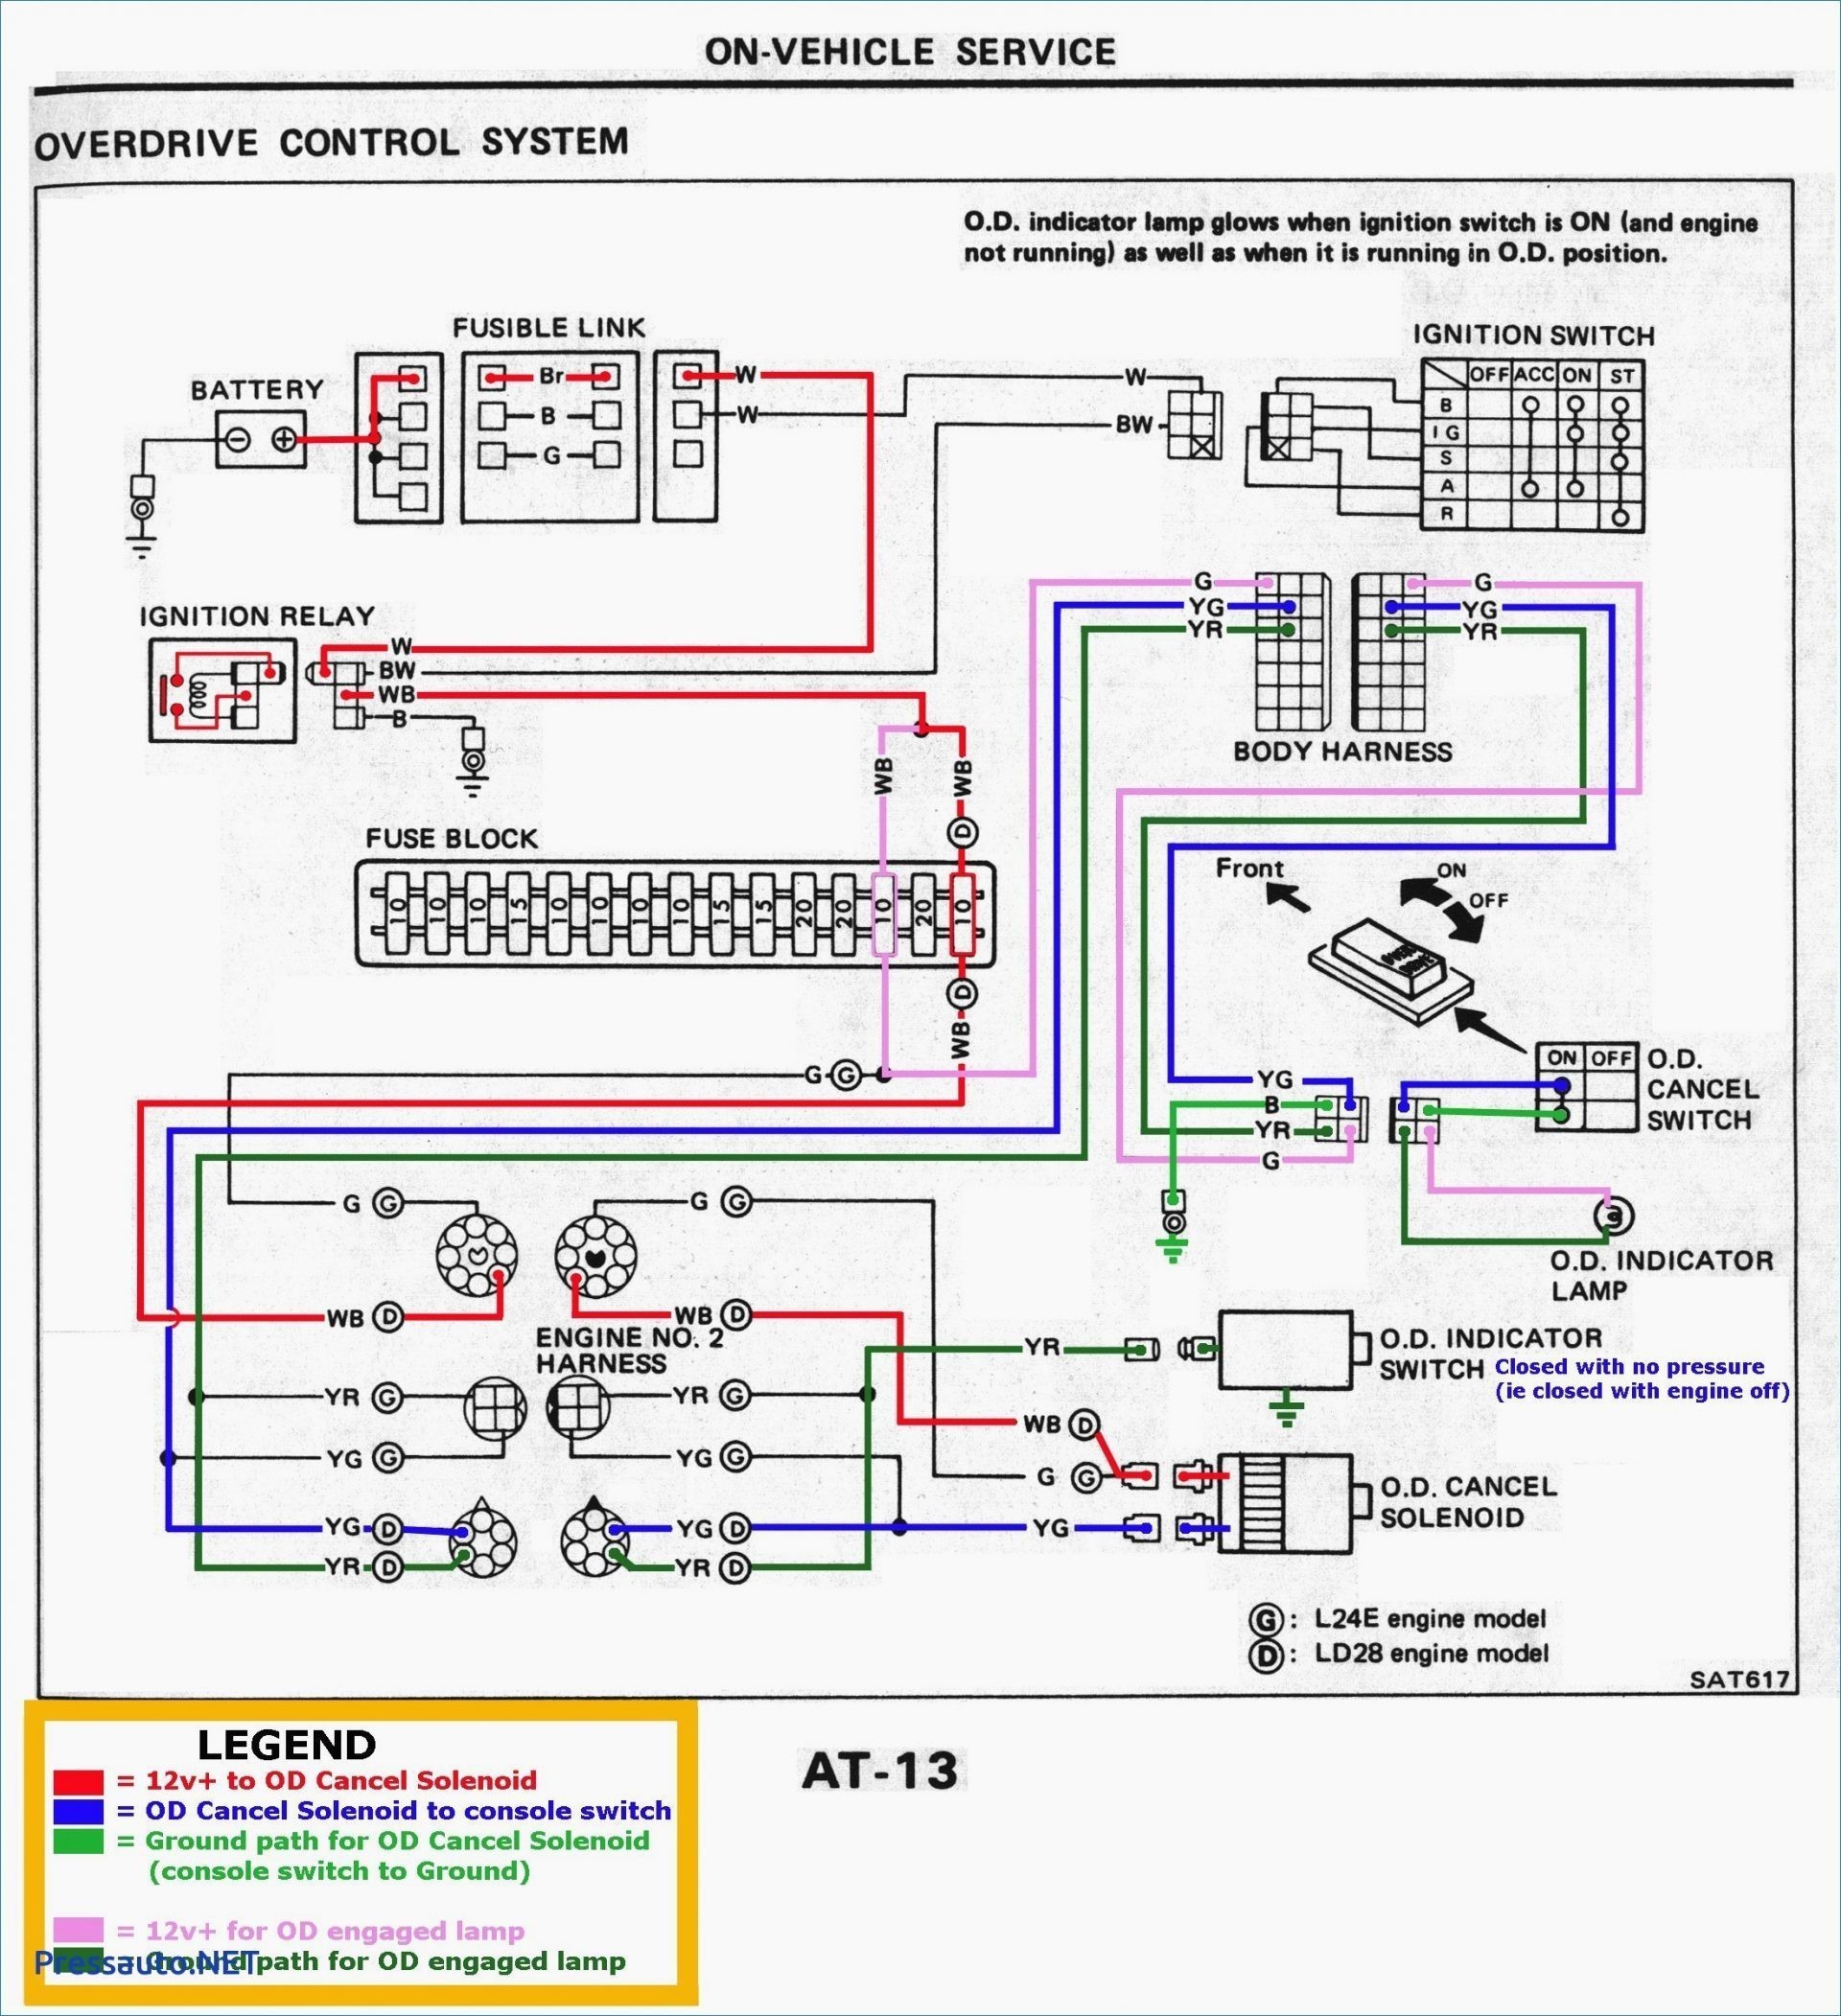 2002 jeep liberty wiring diagram wiring diagram for 2003 jeep grand cherokee wiring diagram used of 2002 jeep liberty wiring diagram